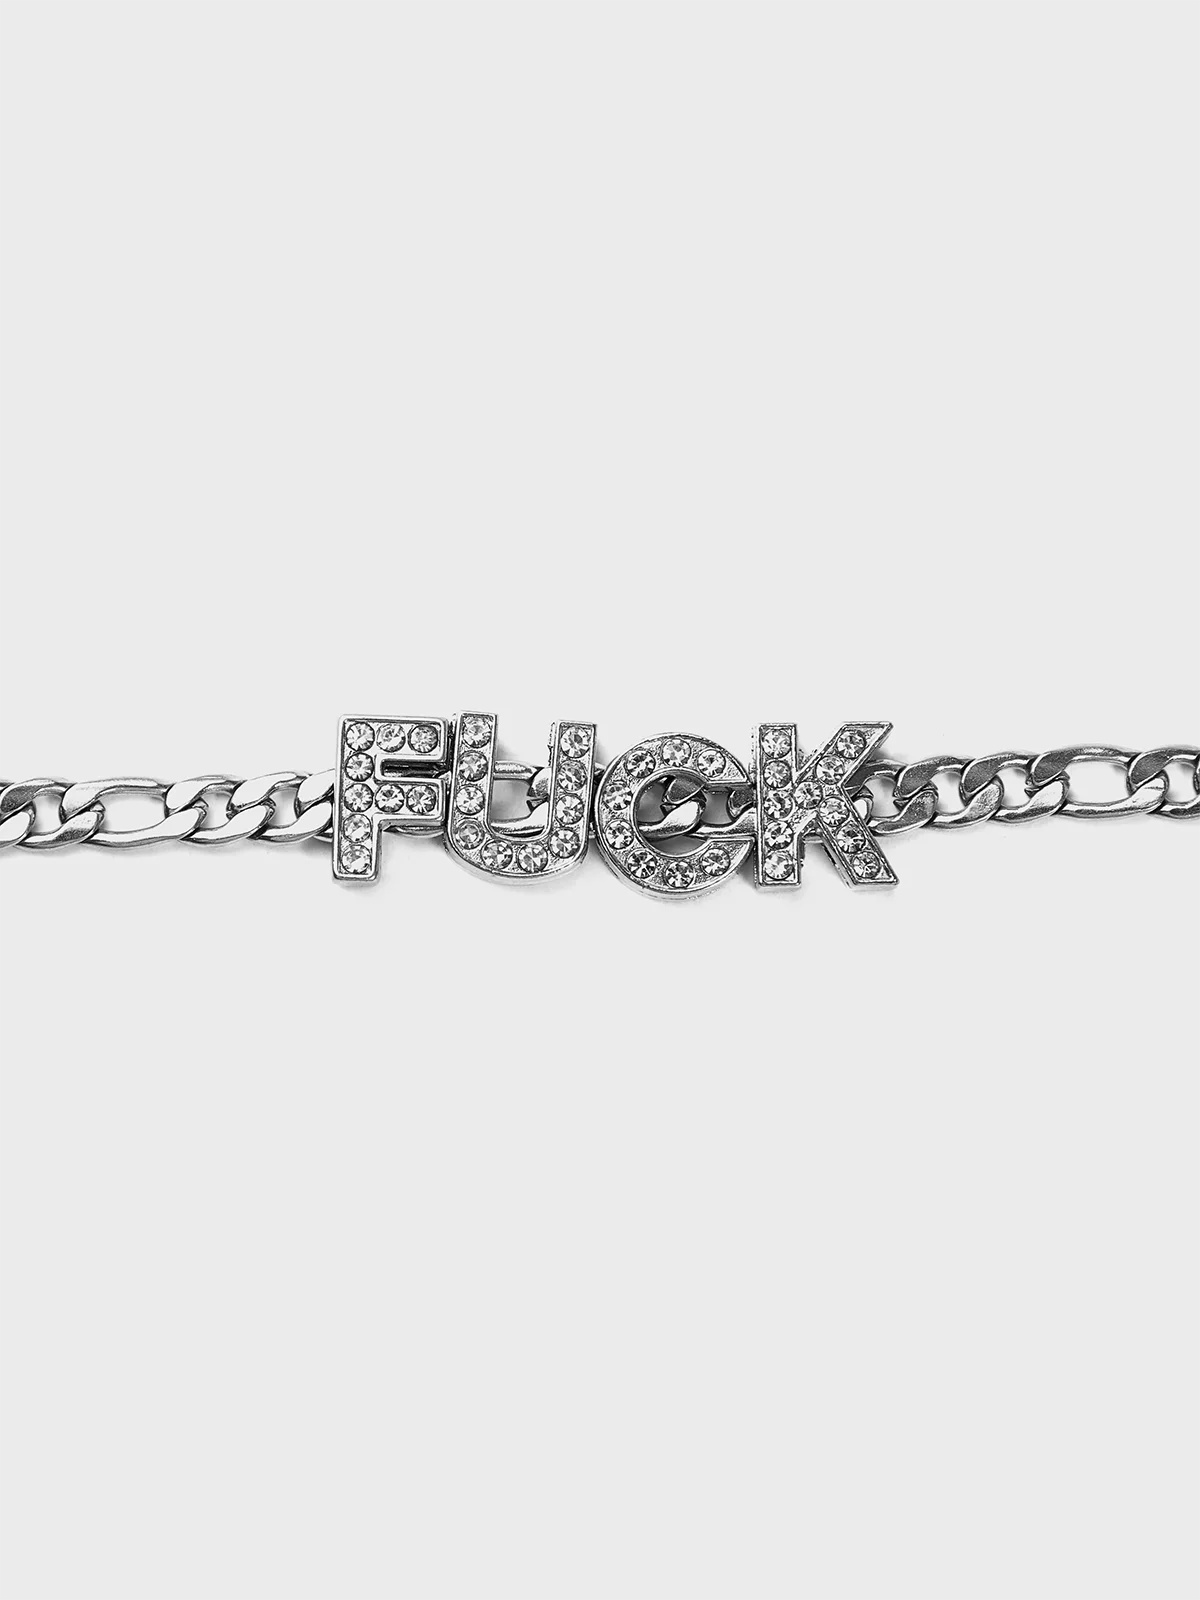 Metal Text Letters Necklace